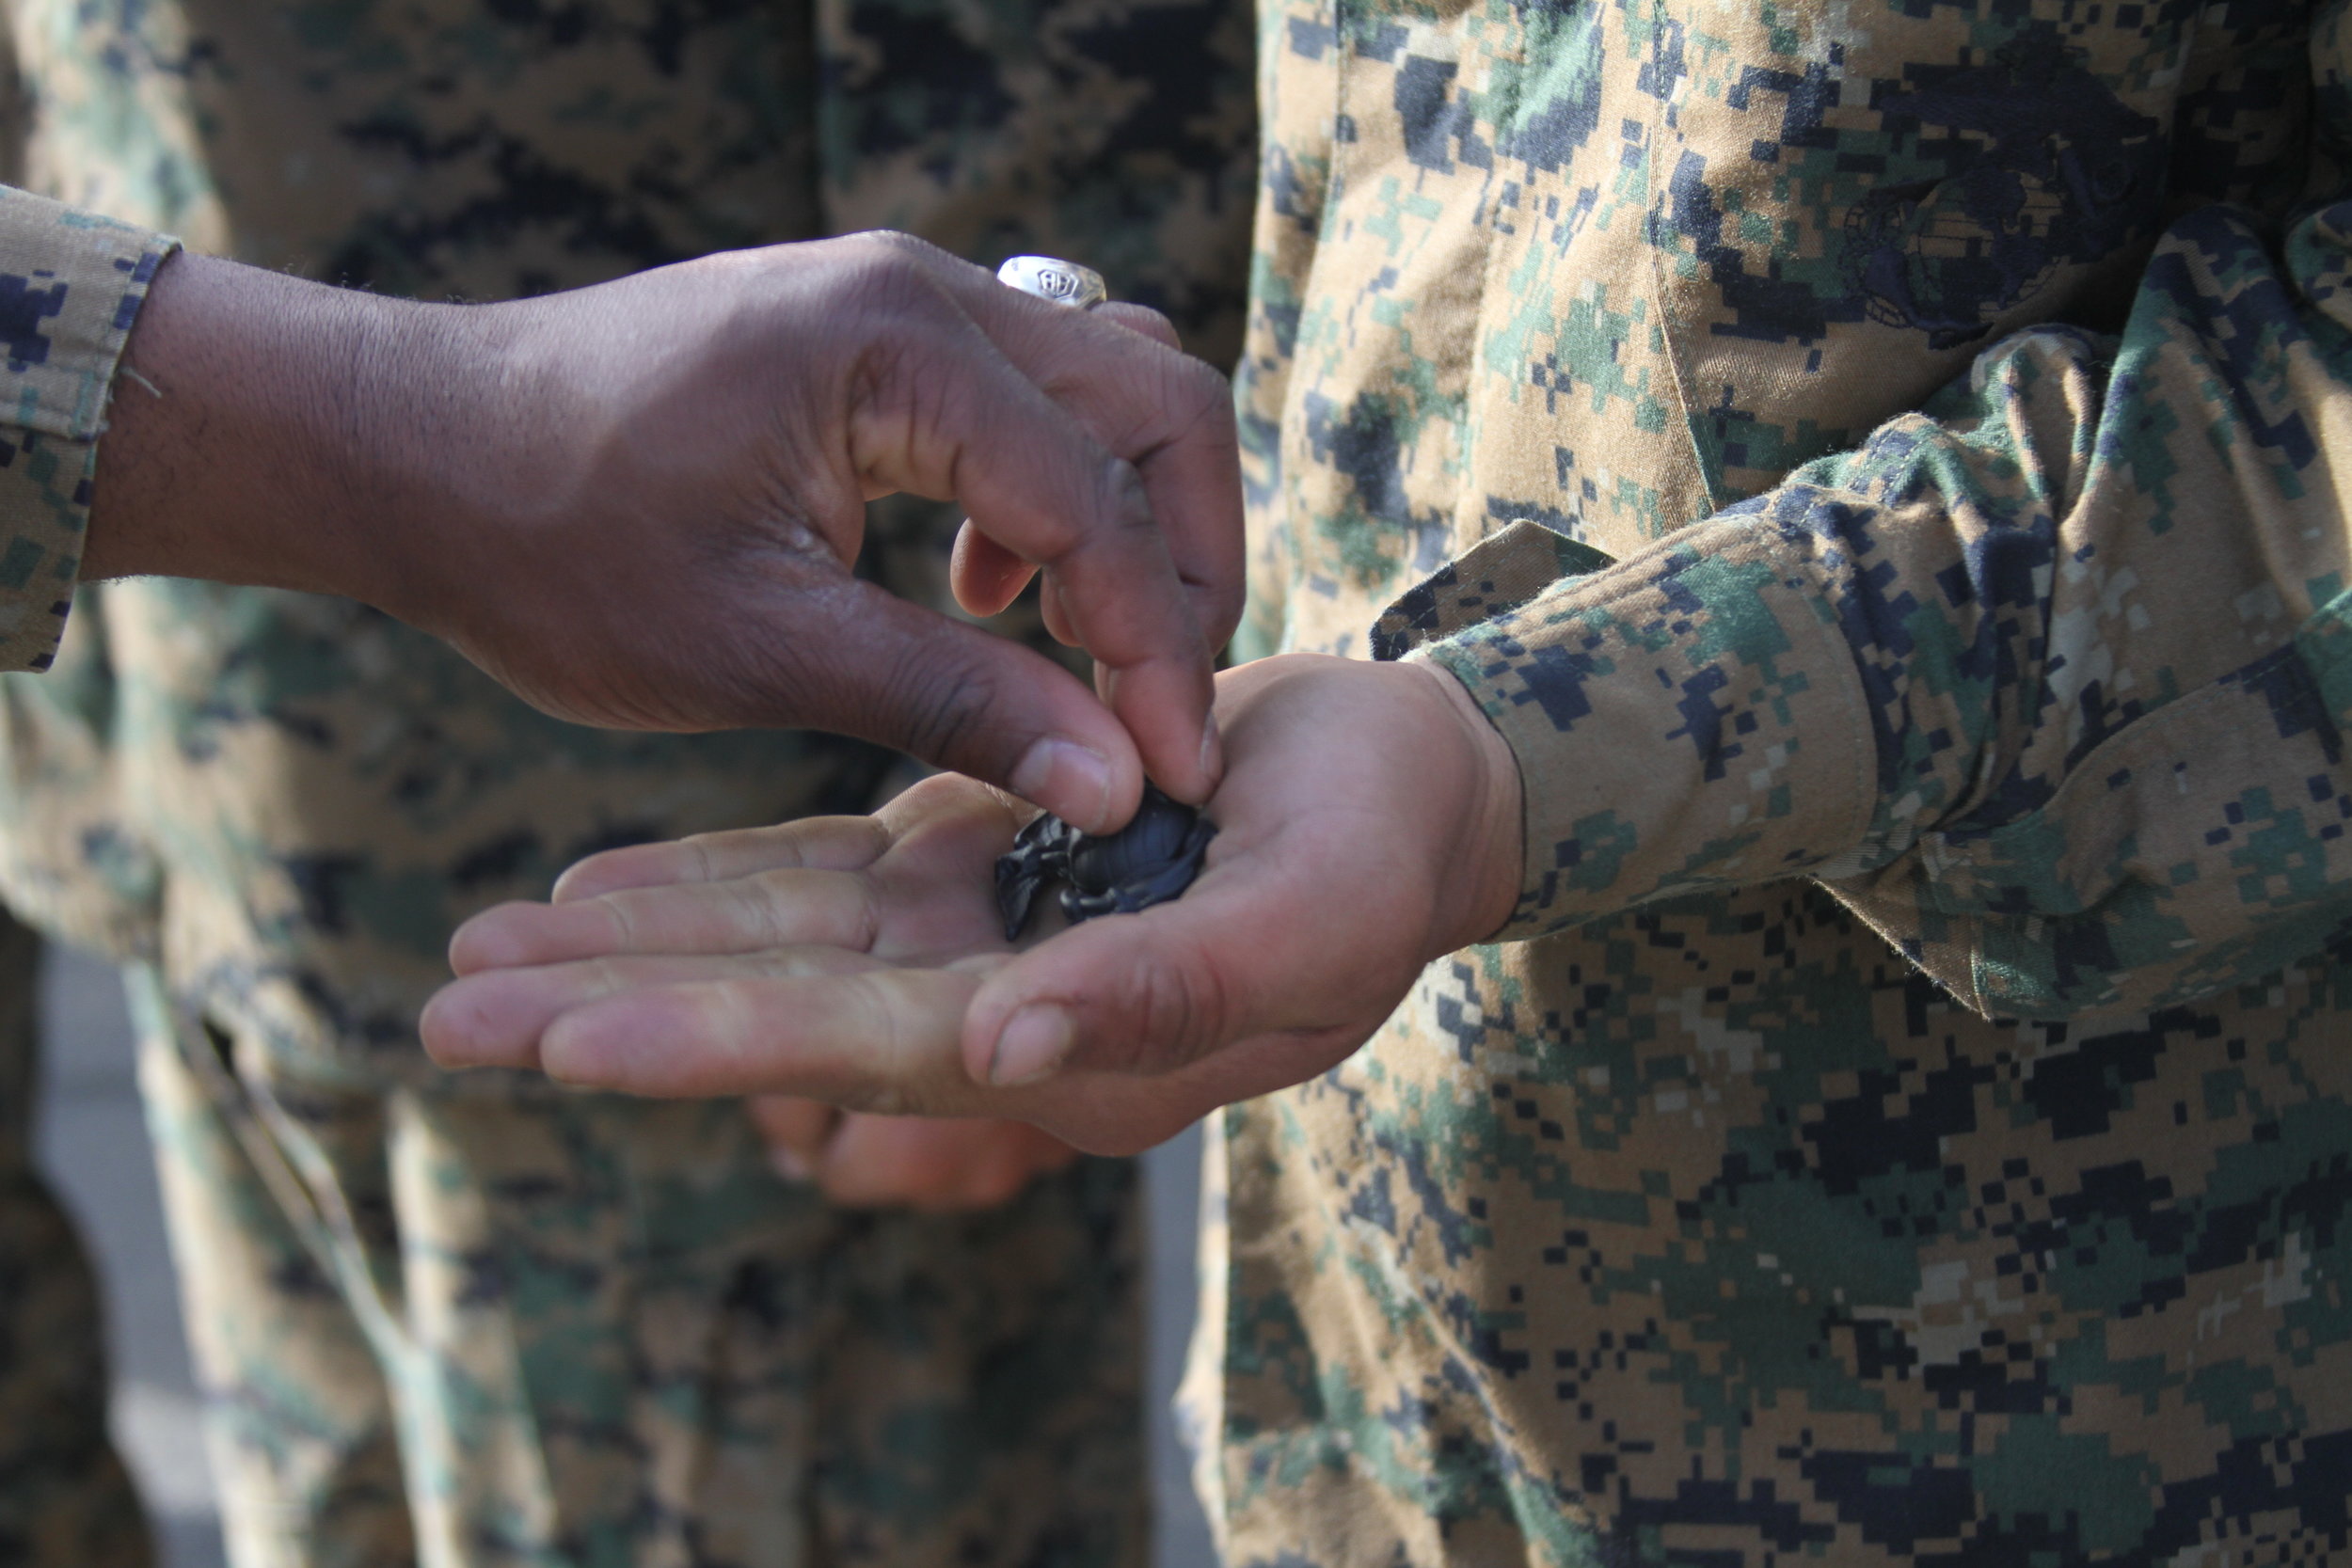 A new Marine from Company G holds the eagle, globe and anchor during an emblem ceremony at Weapons Field Training Battalion Nov. 10. During the emblem ceremony, 583 recruits received the coveted emblem from their drill instructors and were called ‘Marines’ for the first time after completing the final test of recruit training, the Crucible.